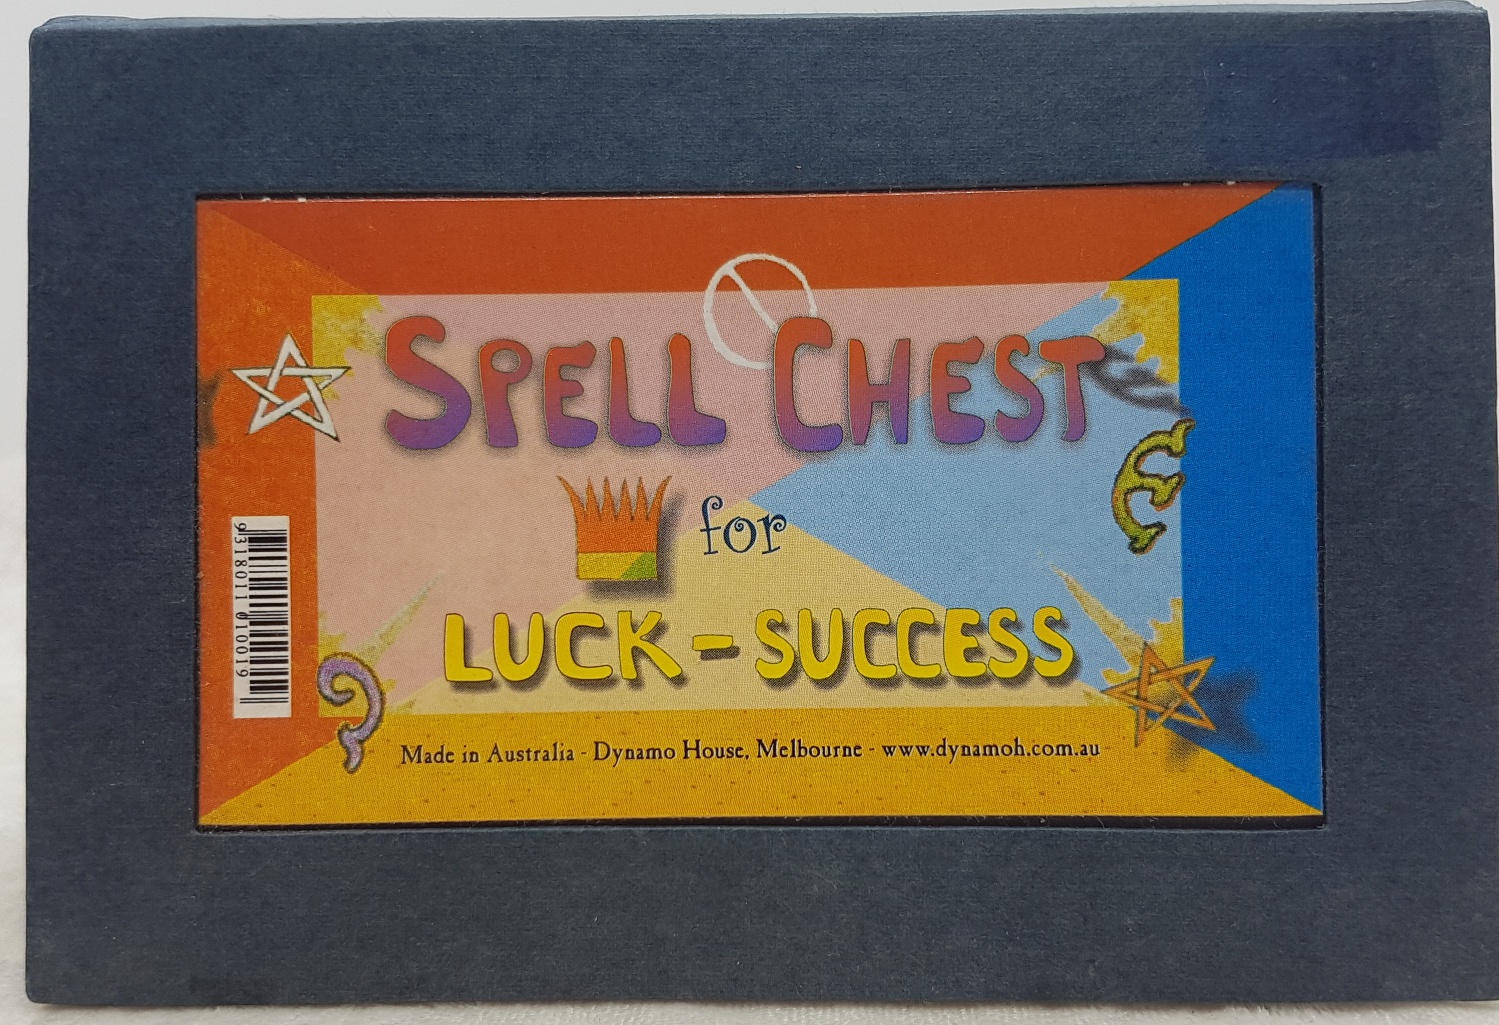 Spell Chest for Luck - Success (missing seed spell)